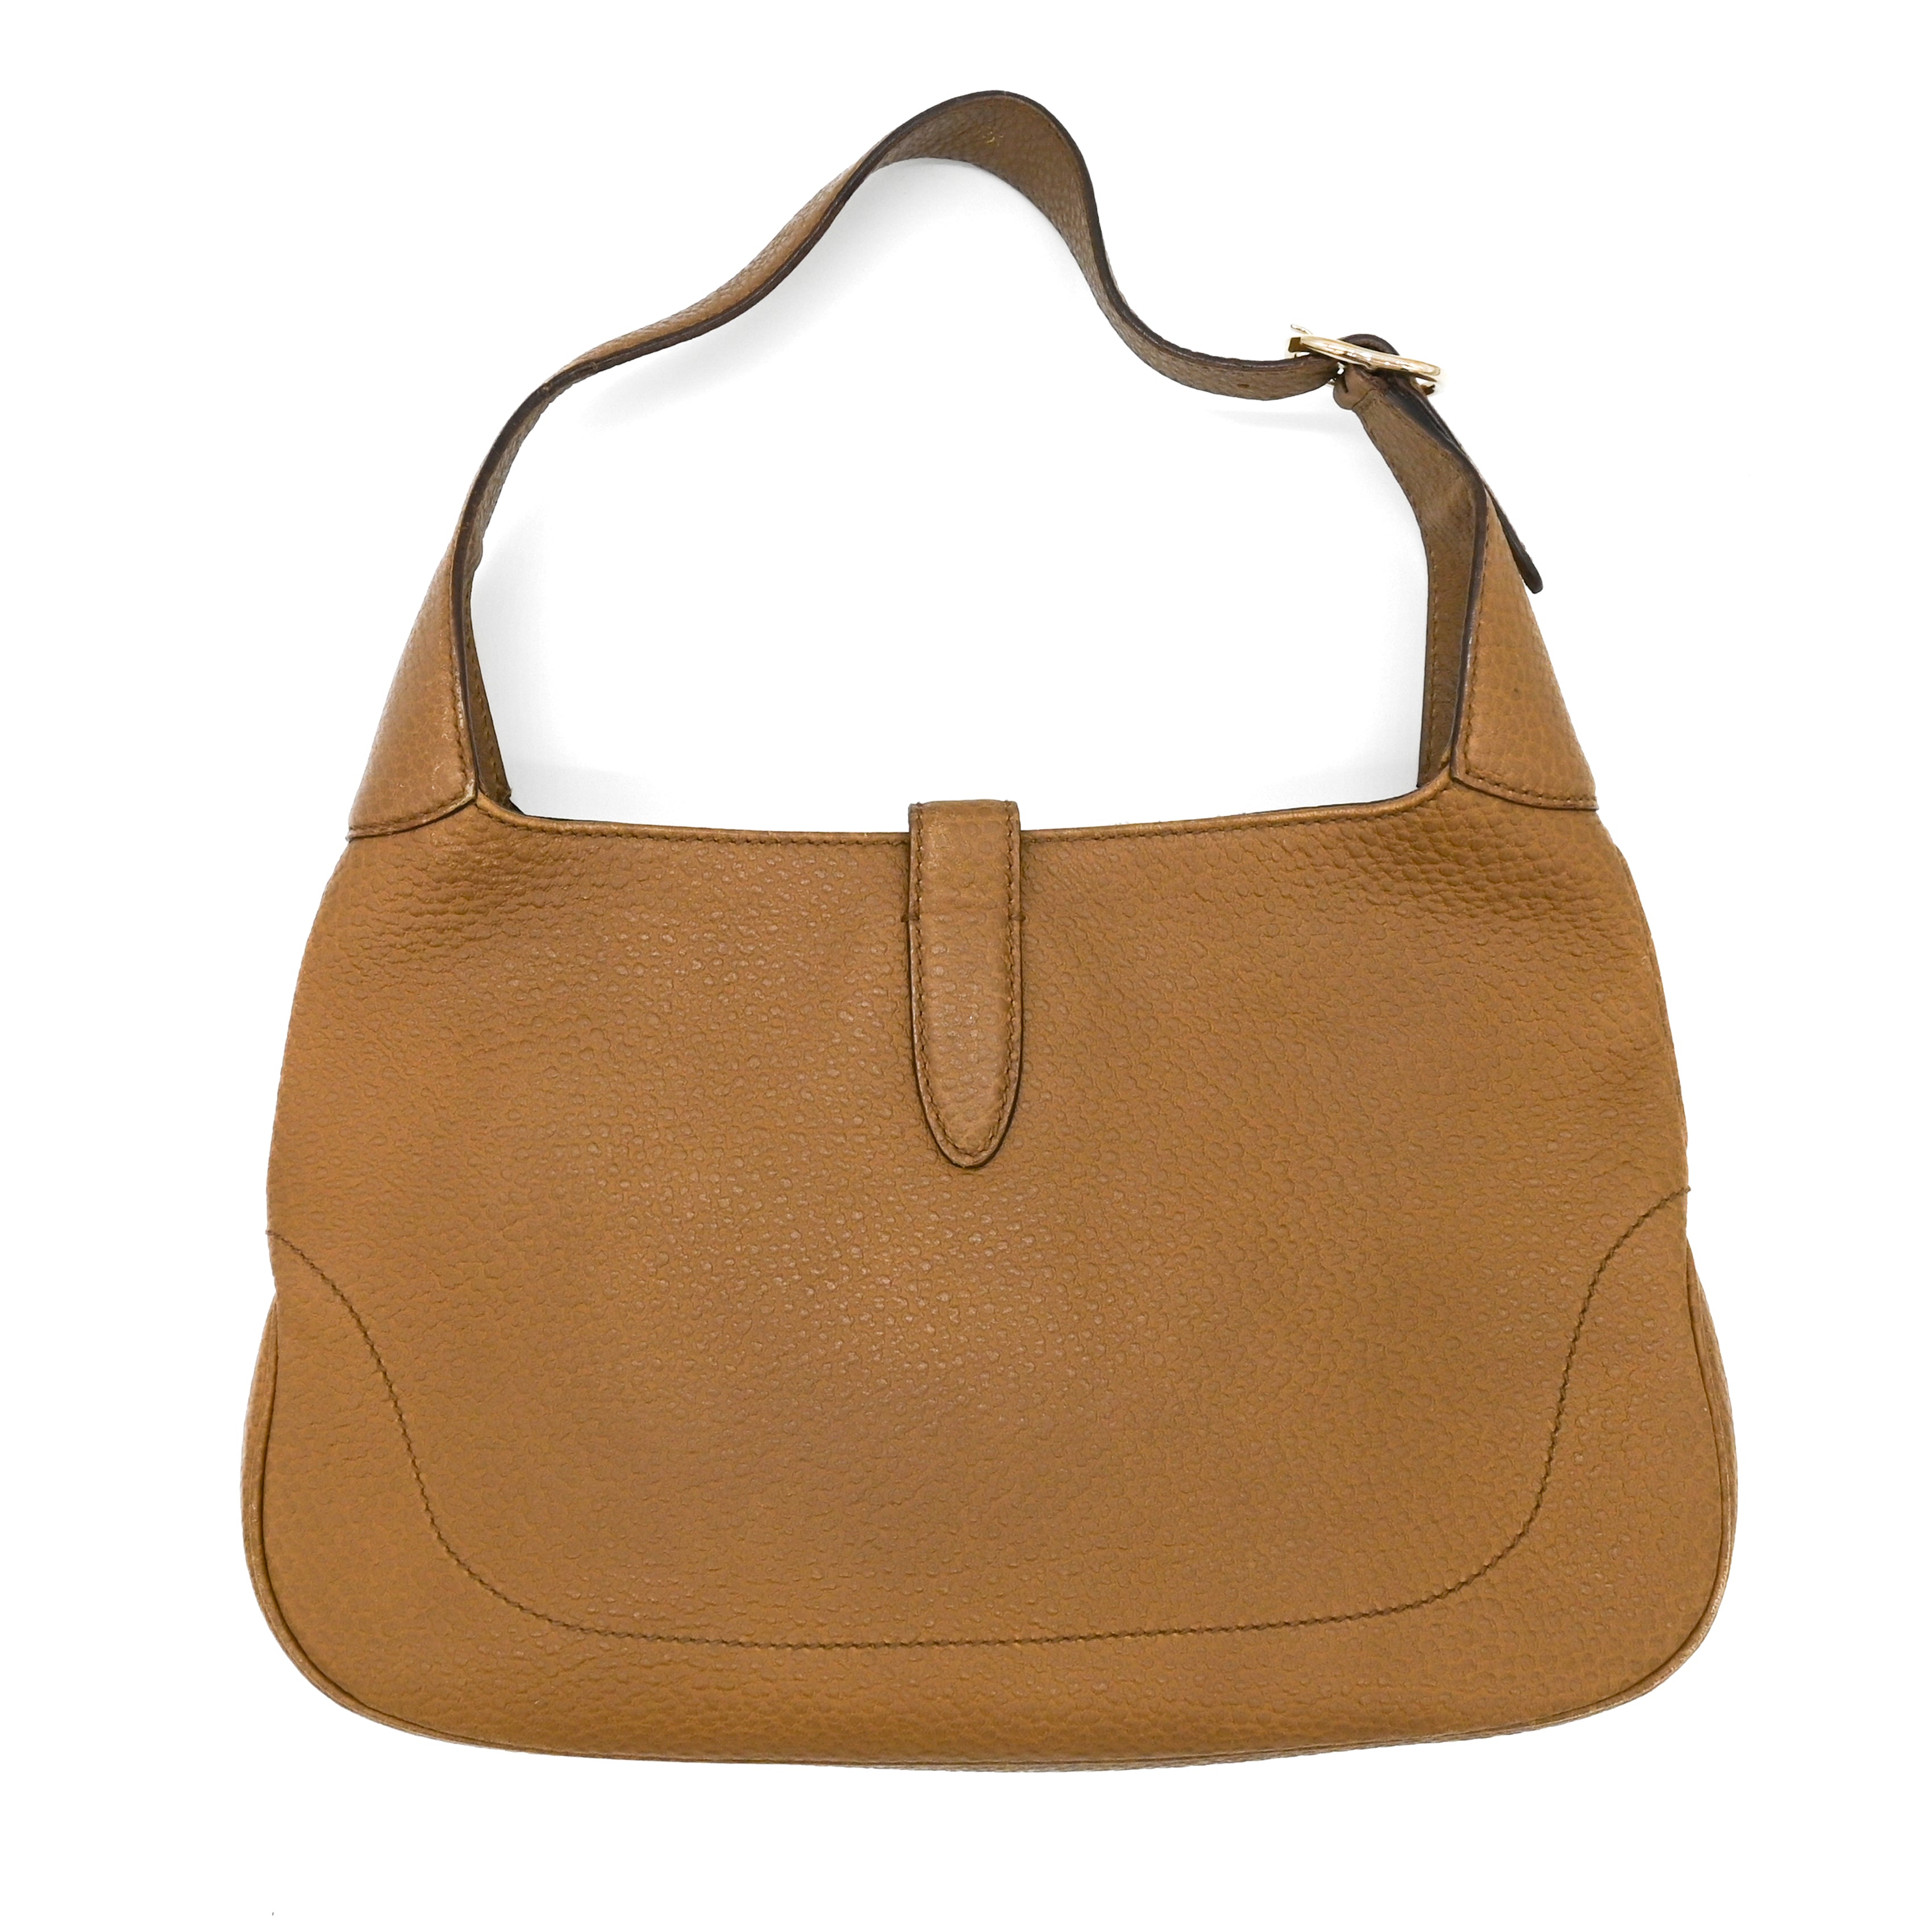 GUCCI Gucci Jackie Small Vintage Calfskin Leather Hobo Bag in Tan - Vault 55